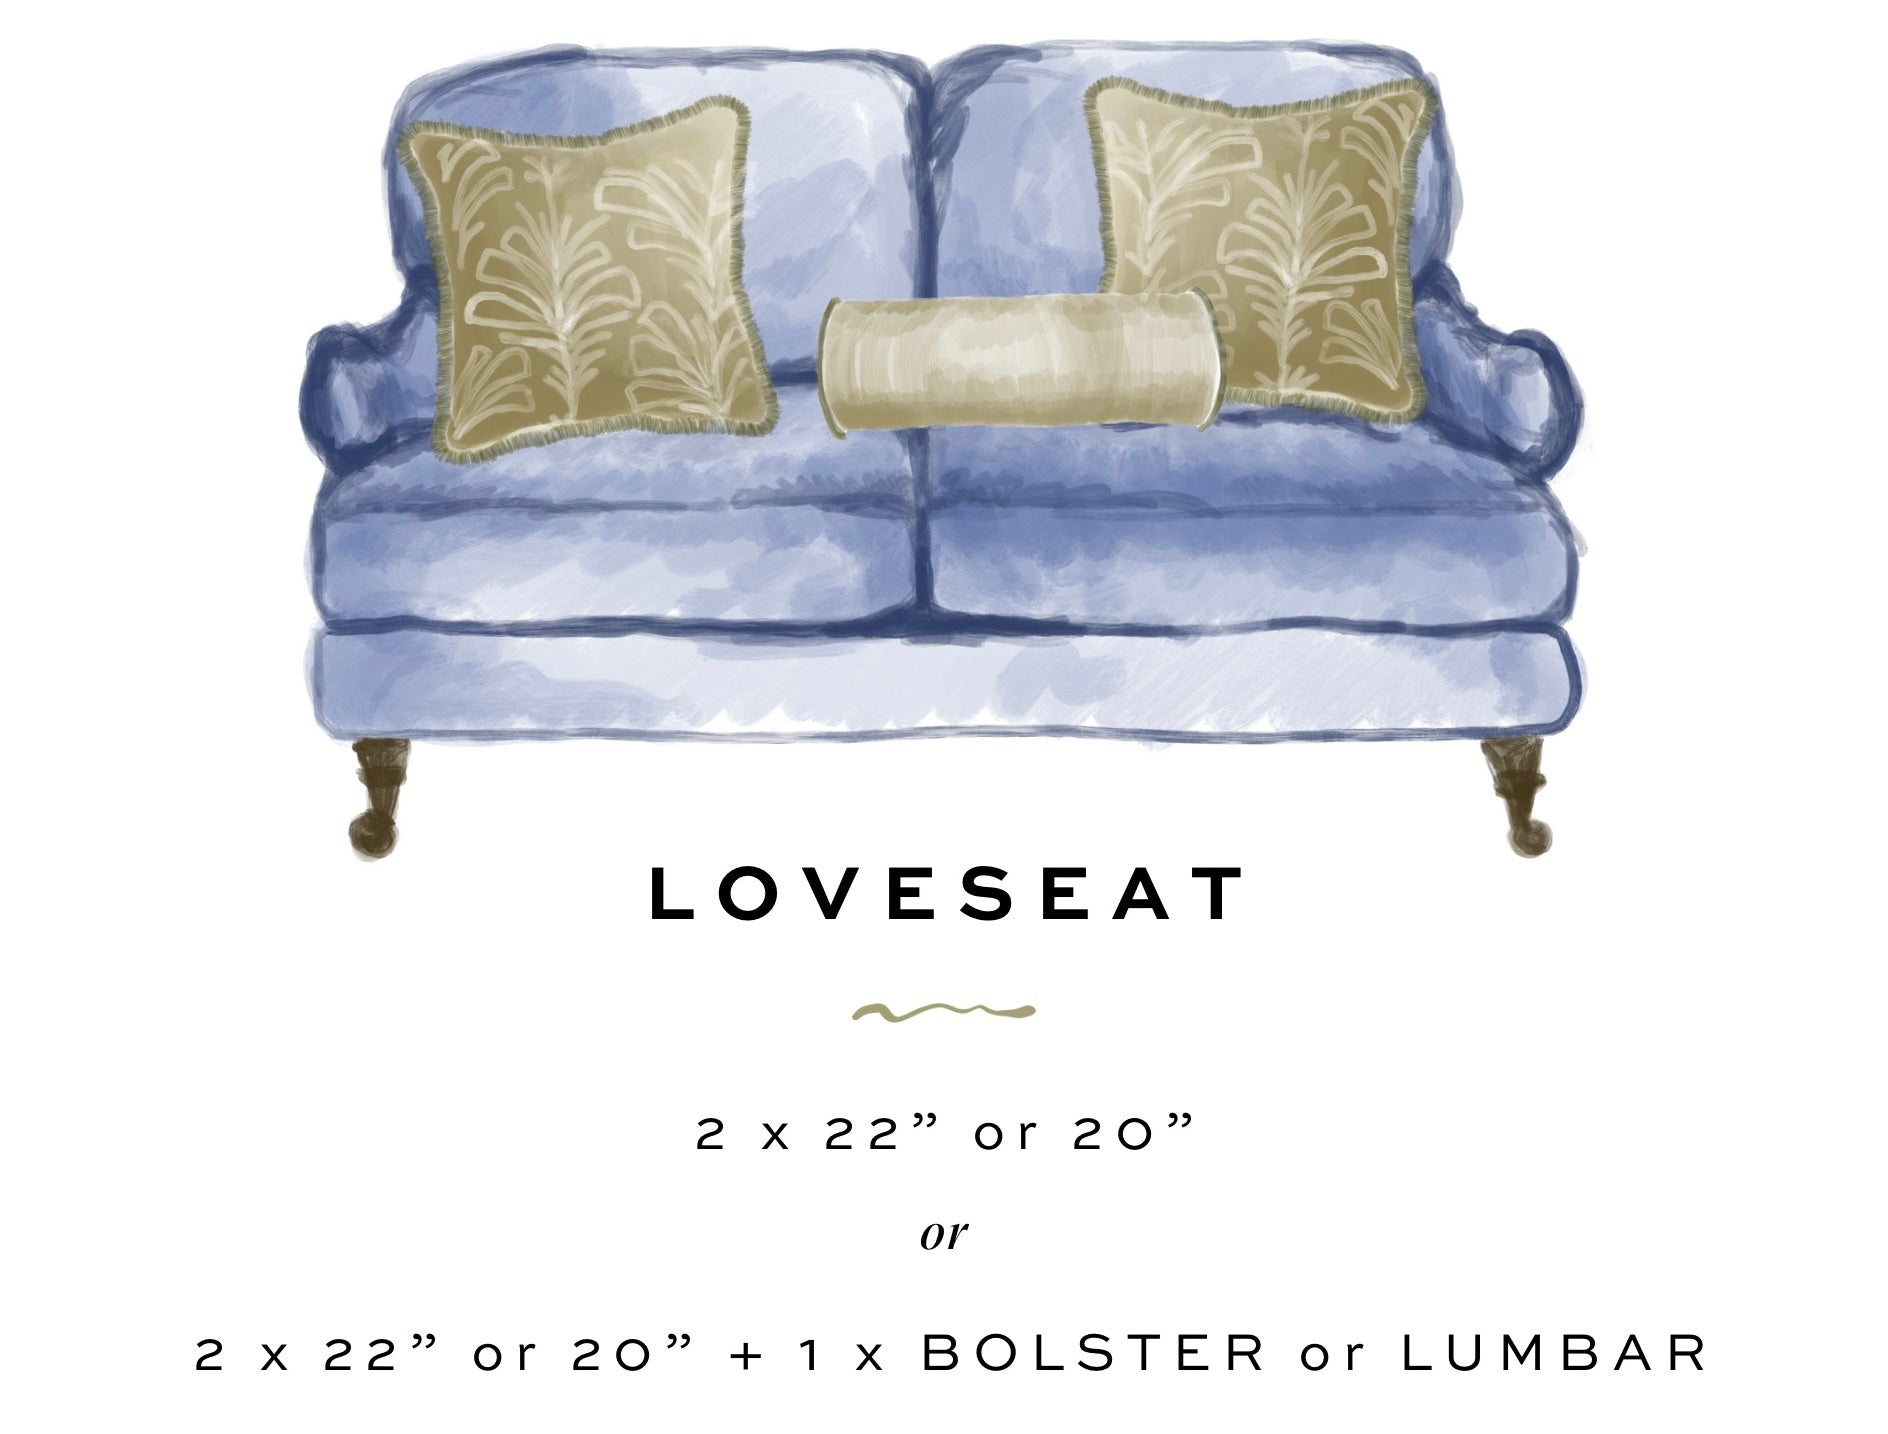 Loveseat Style Guide for Pillows